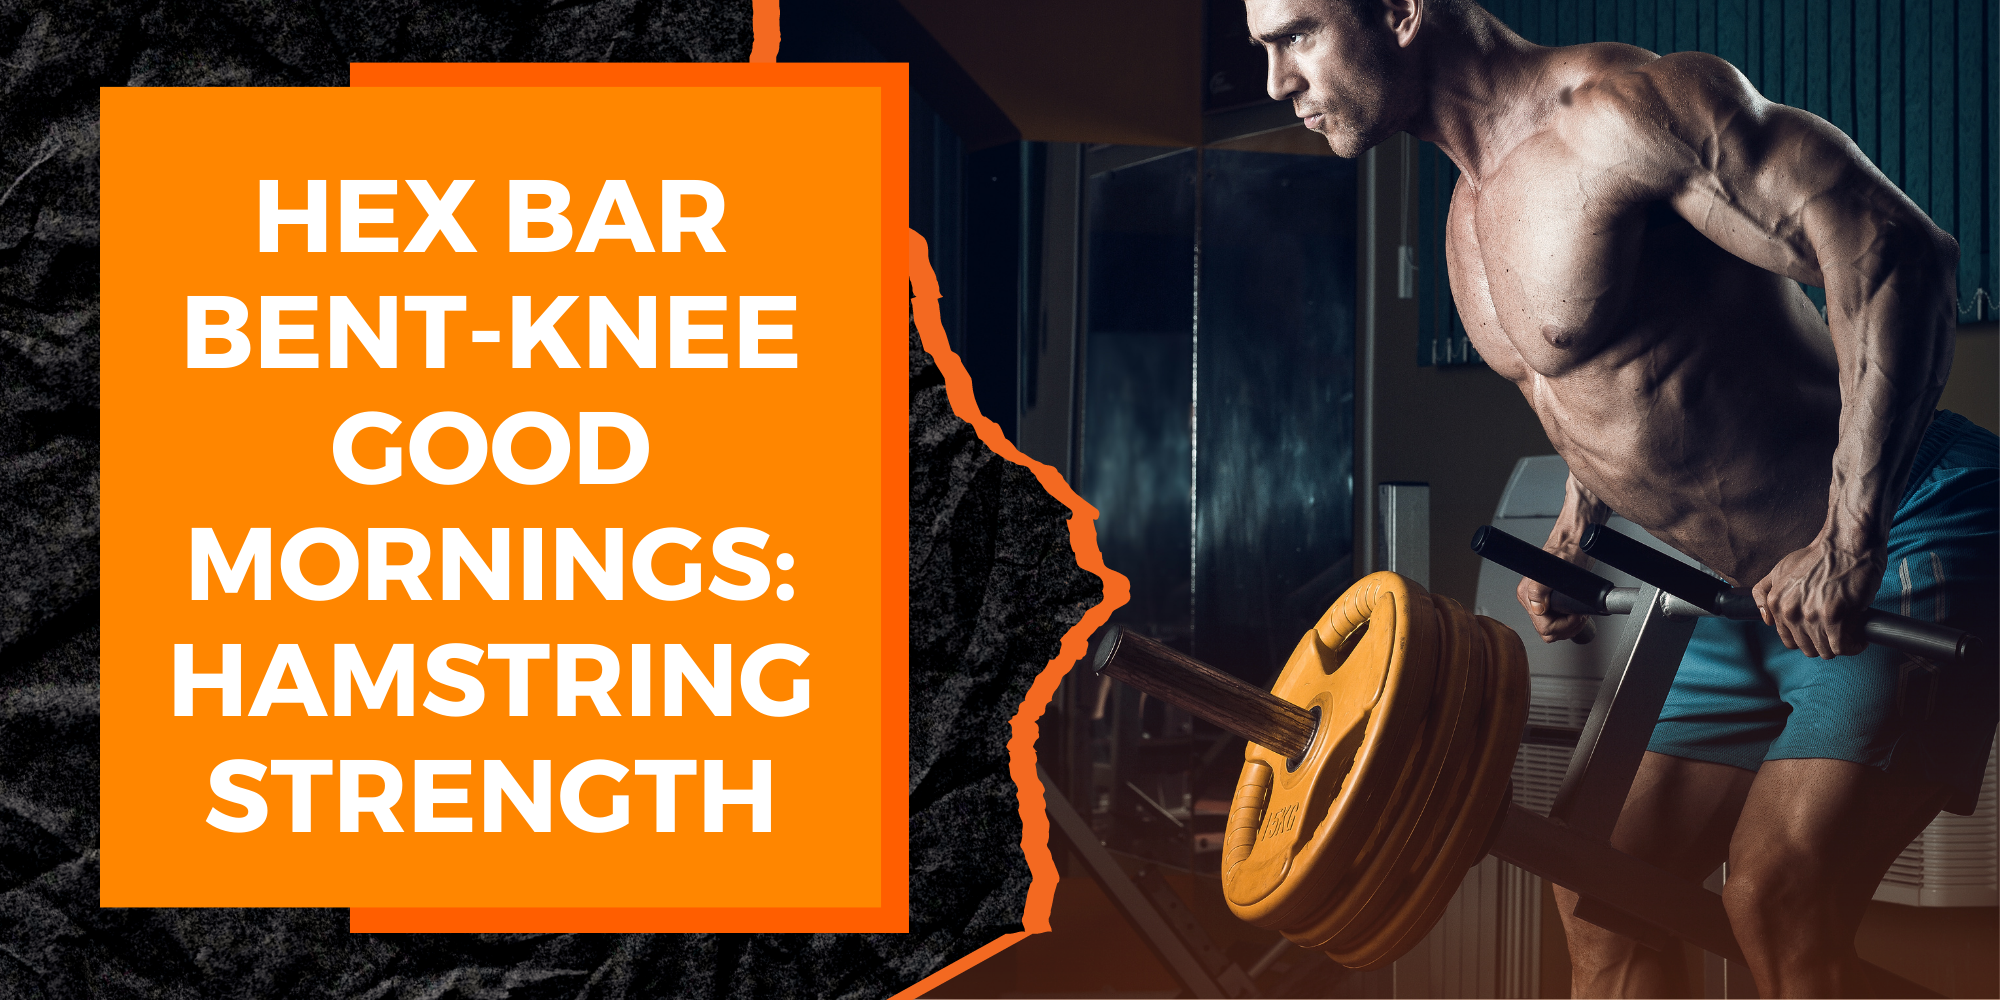 Hex Bar Bent-Knee Good Mornings: An Exercise for Improved Hamstring Strength